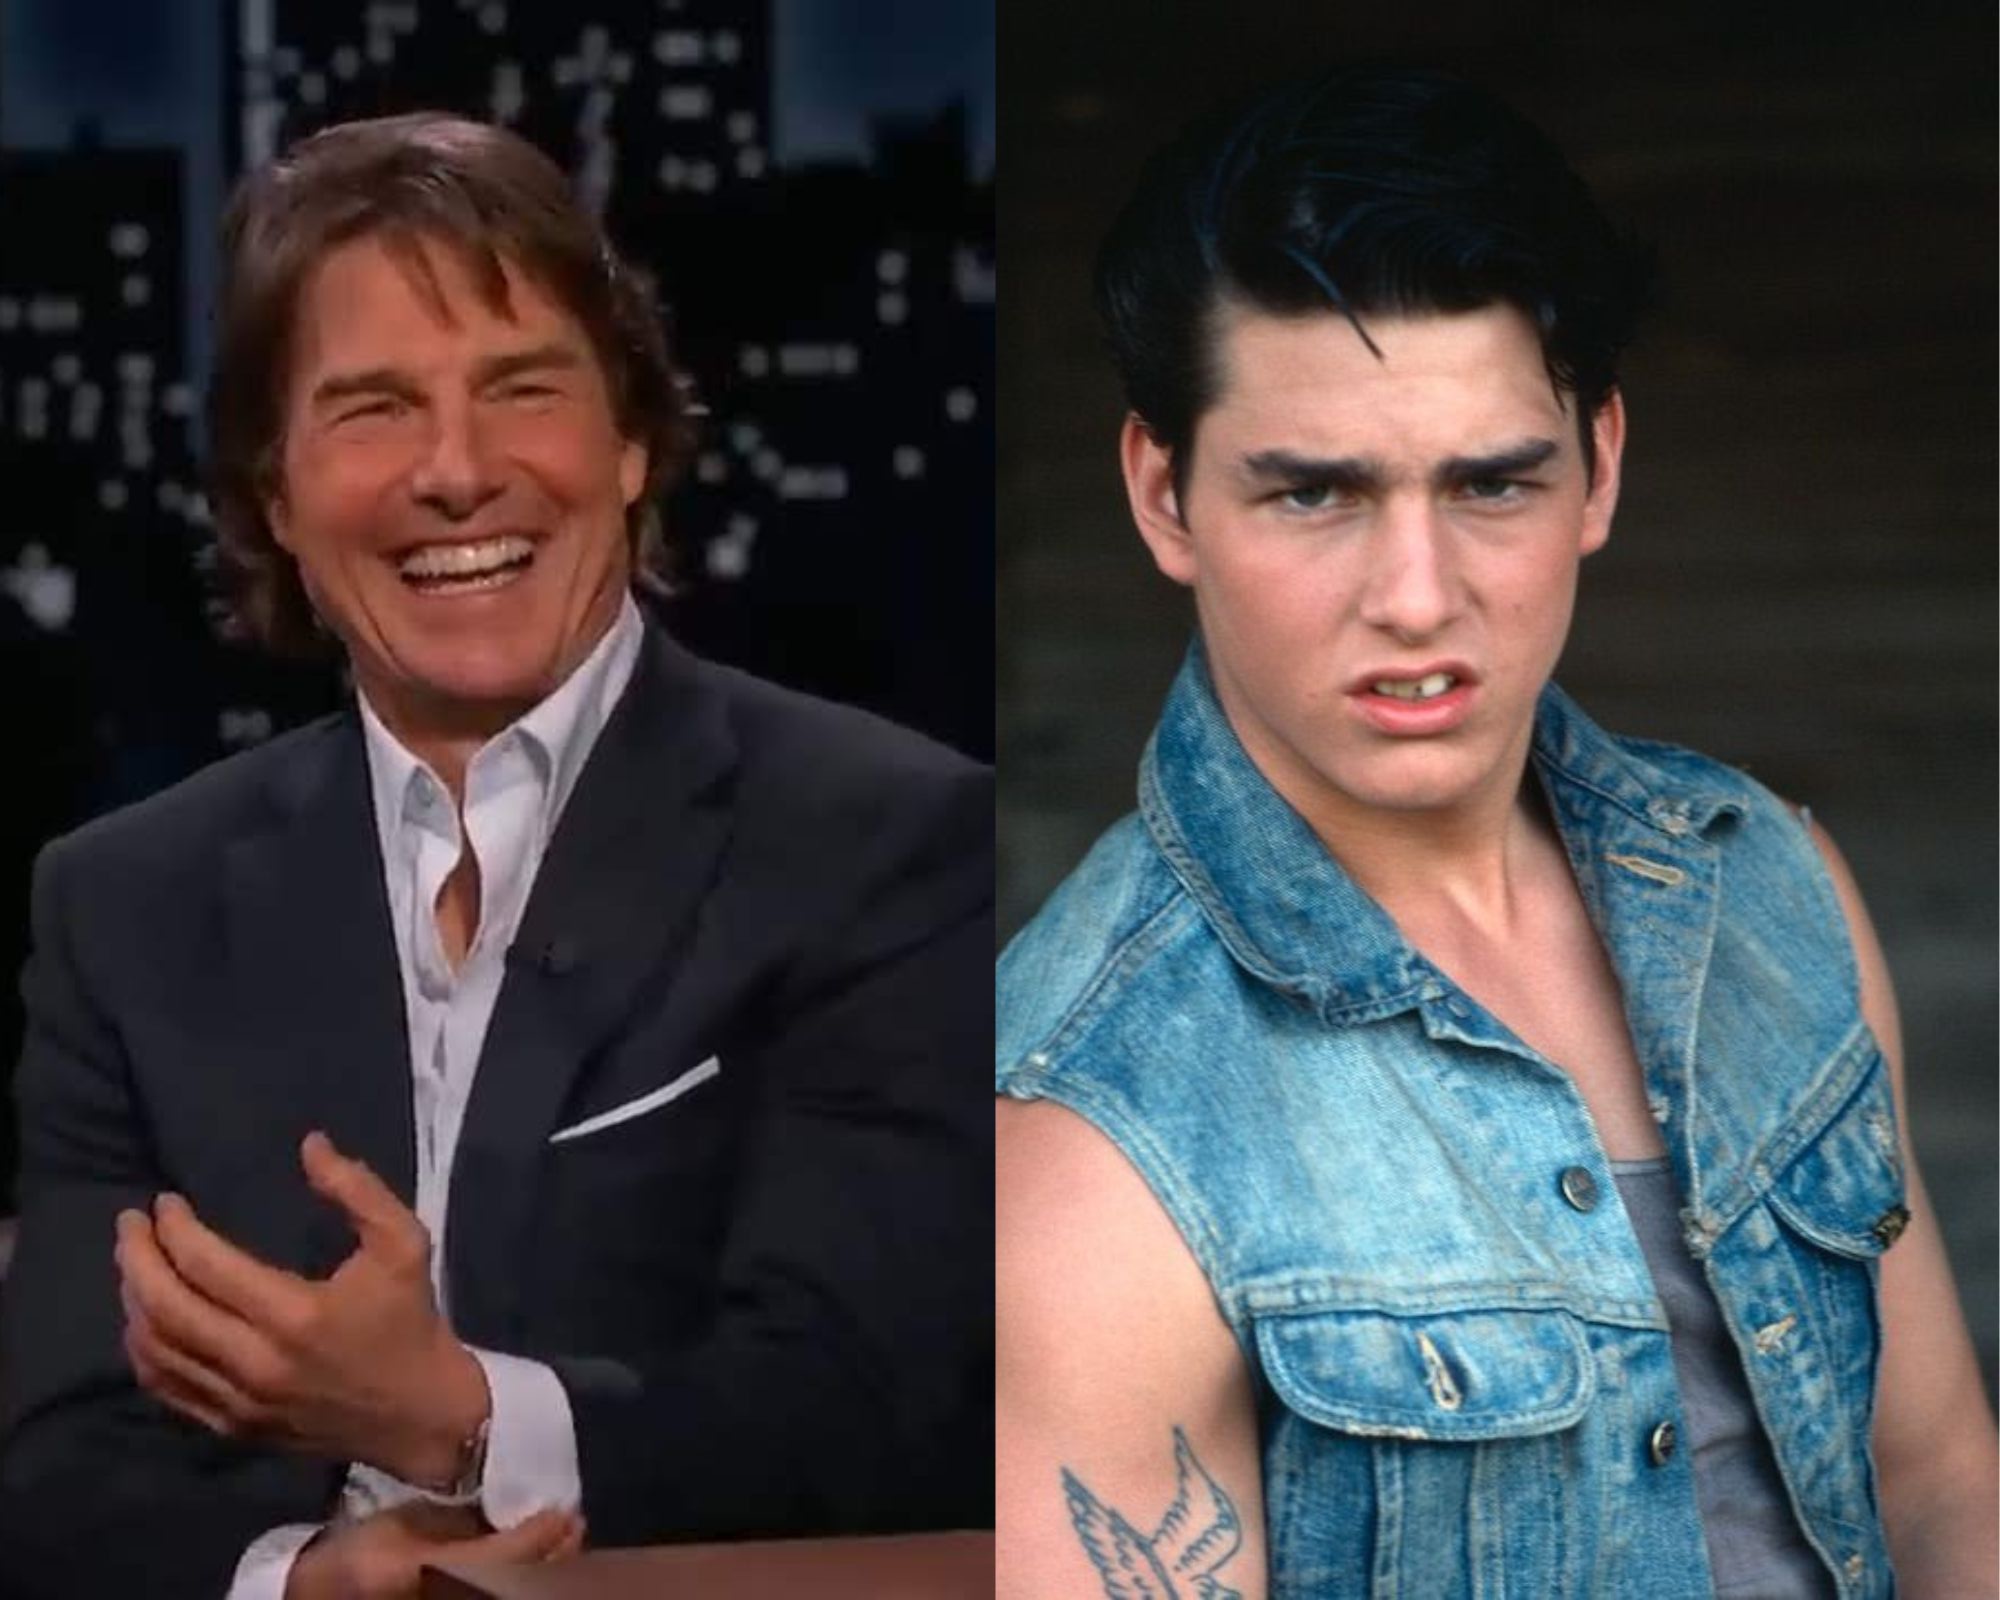 Tom Cruise before (R) and after (L) (Credits: NBC)